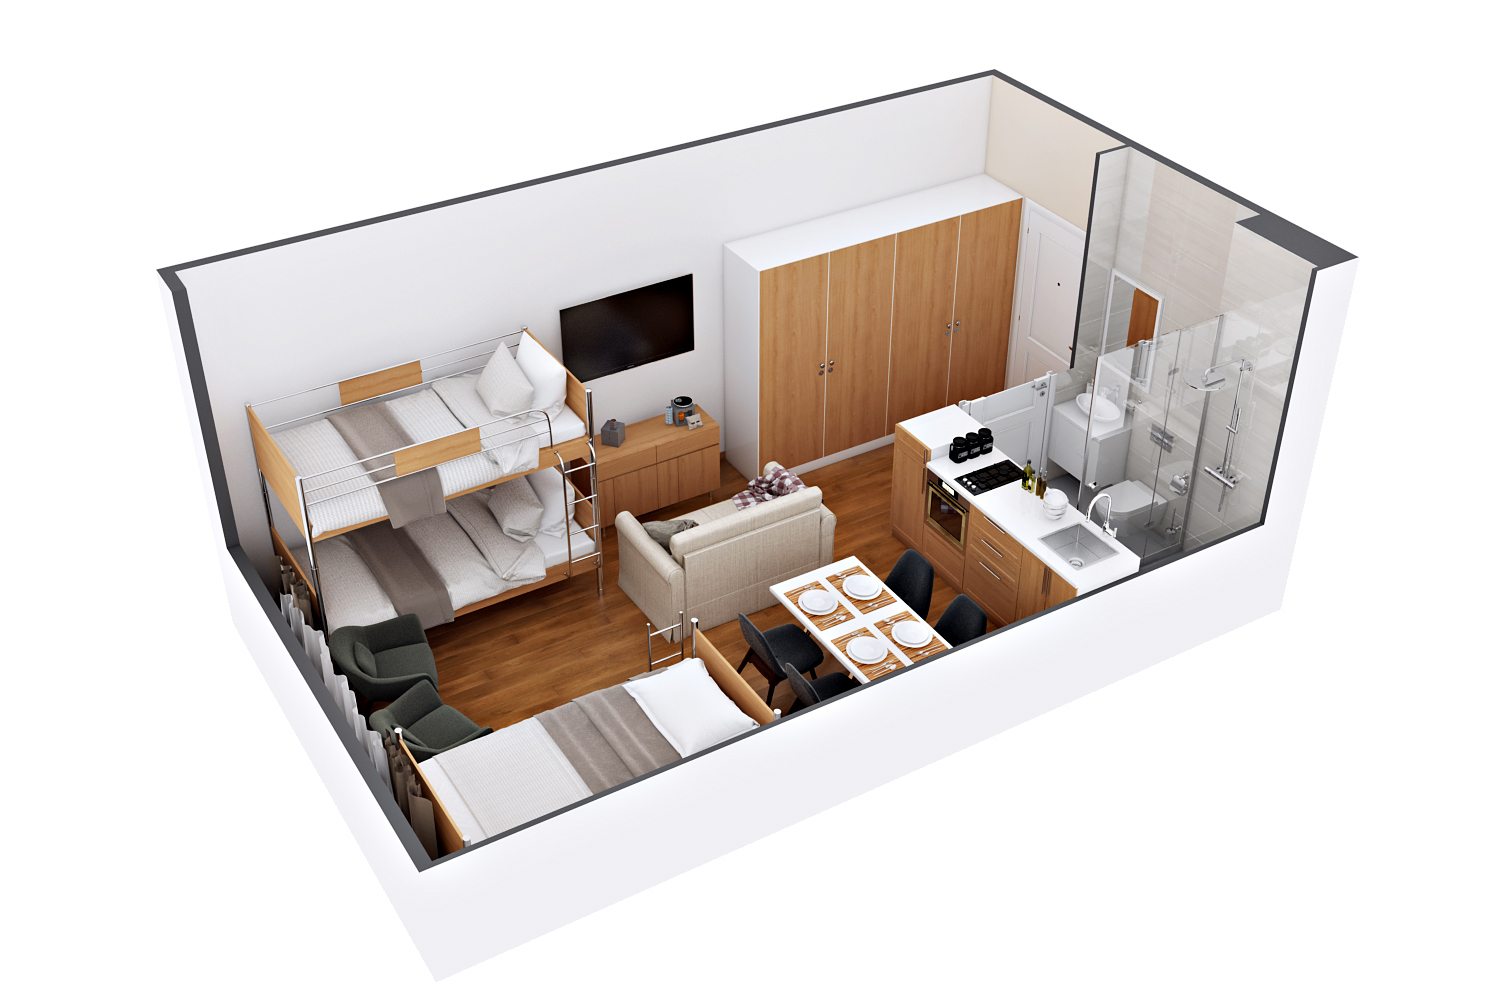 3D Floor Plan of a Compact Apartment